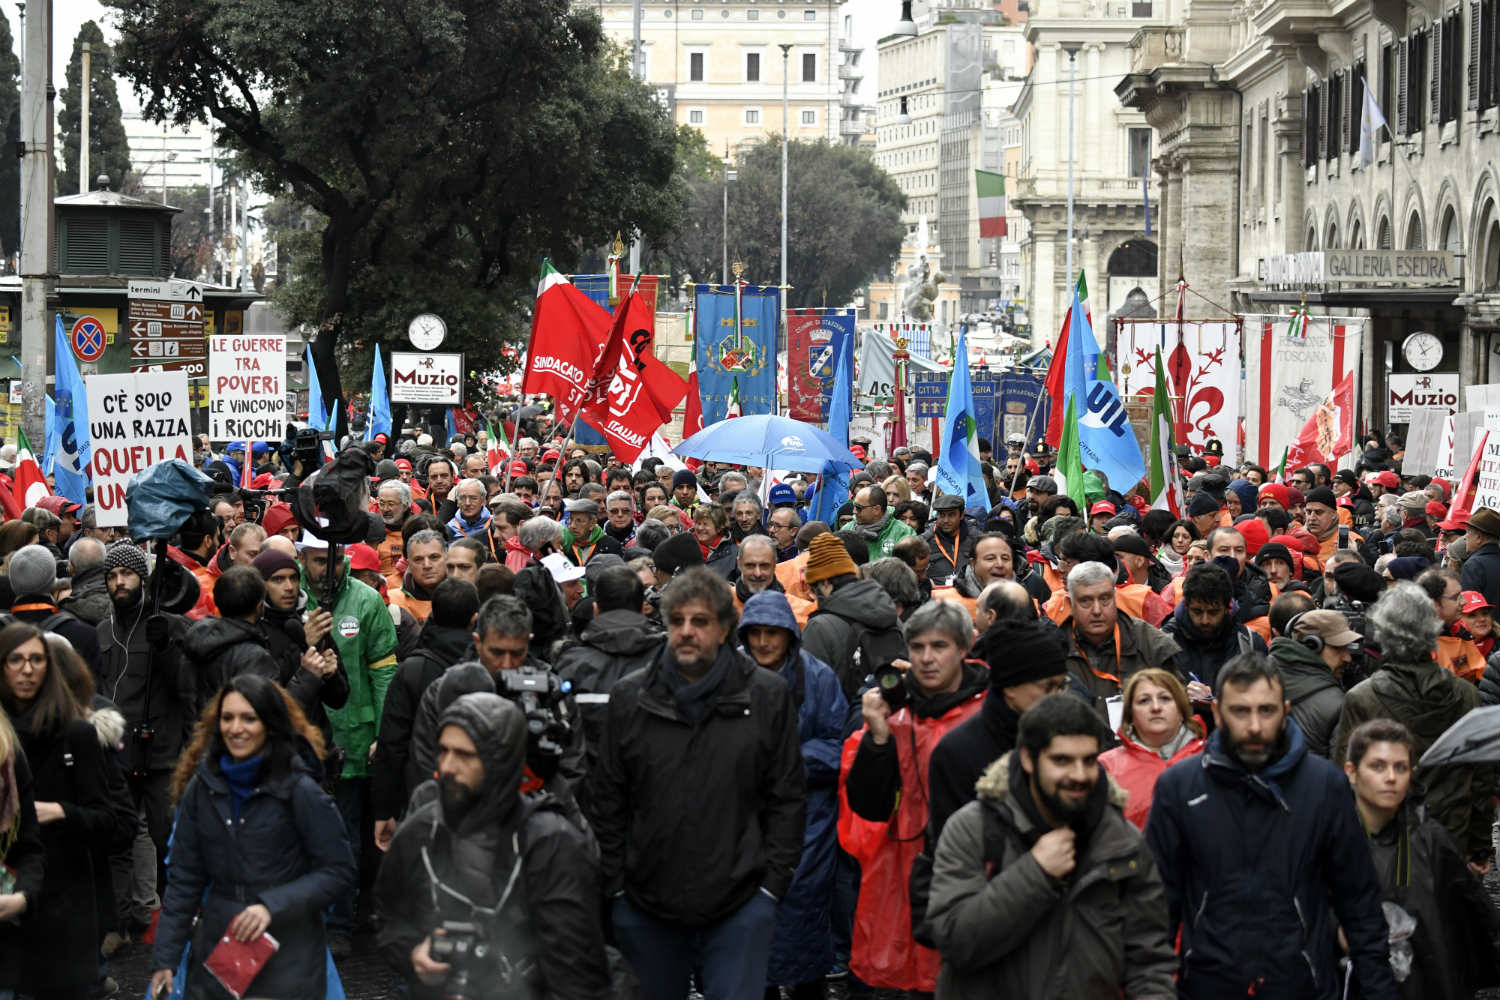 Tens of thousands march in rival protests across Italy